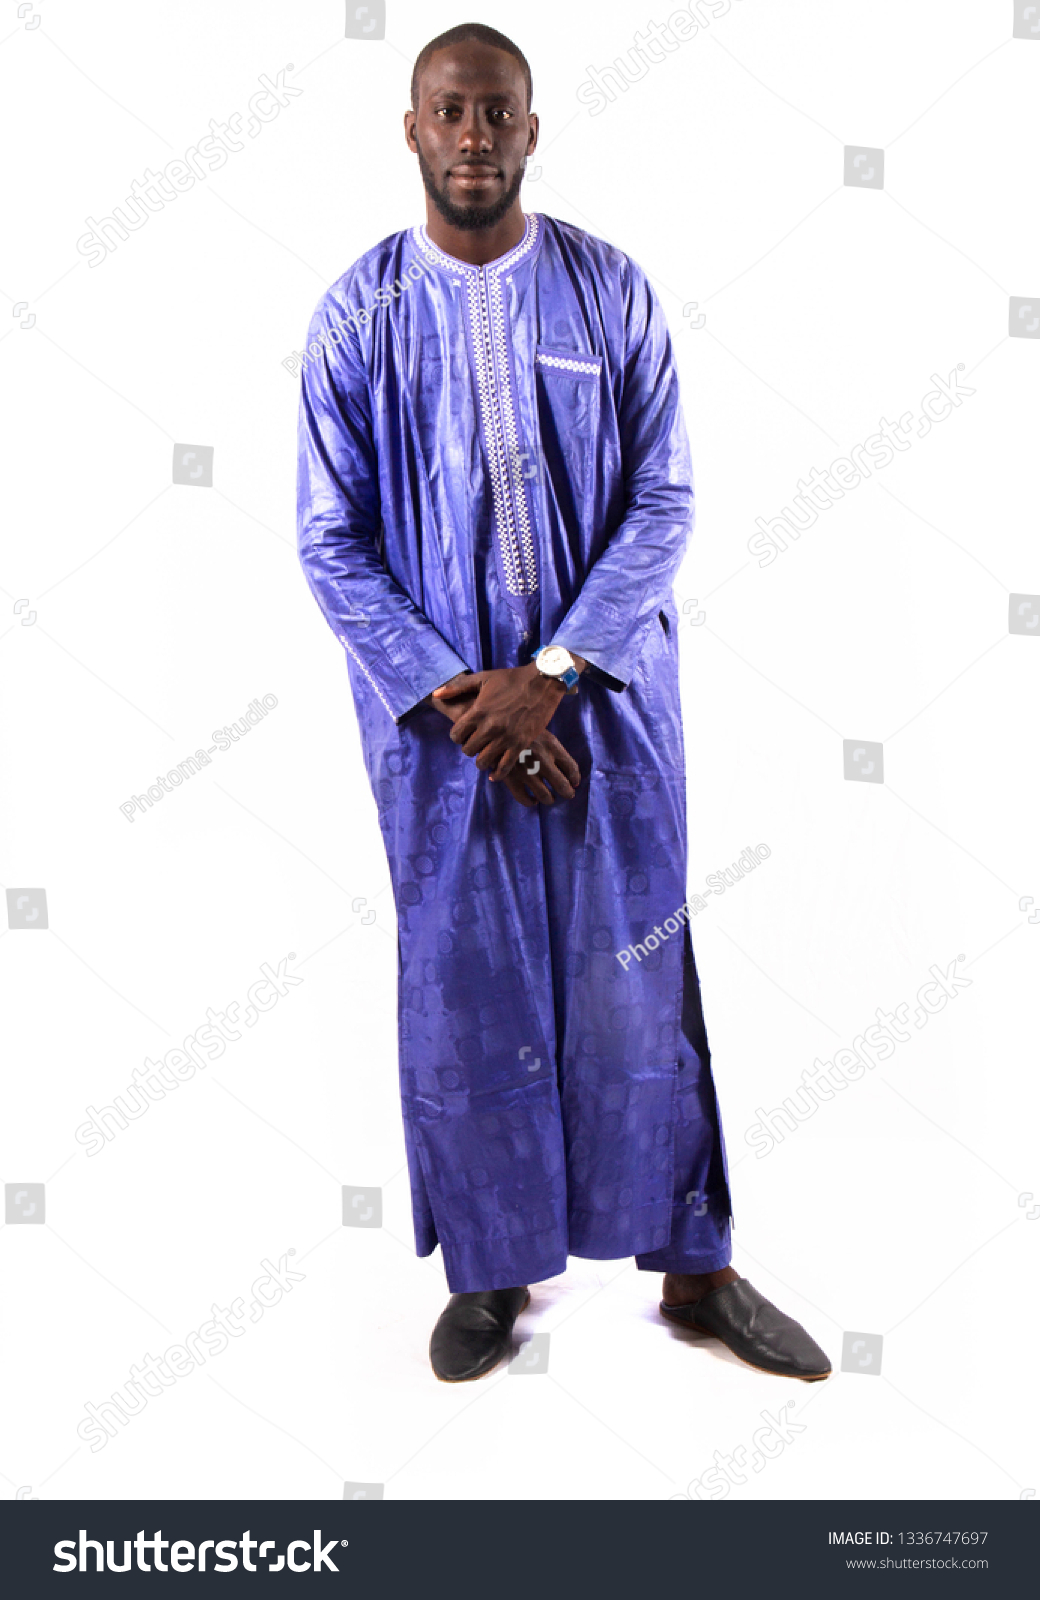 Young and handsome. Handsome young African senegalese man in smart casual jacket holding hands in pockets and traditional smiling while standing against white background #1336747697